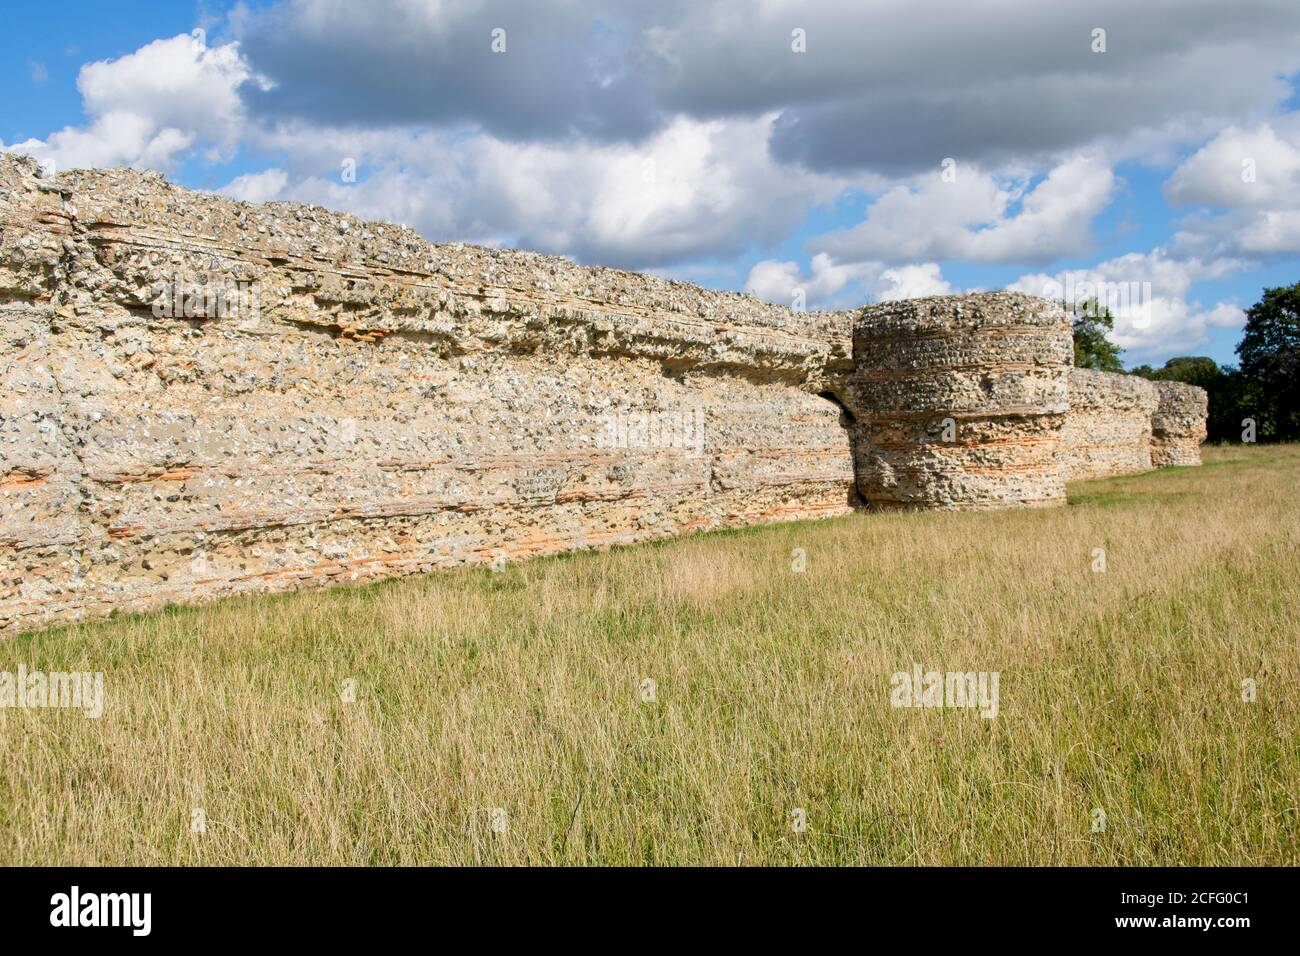 Burgh Castle wall ruins of Roman Fort. Close up view of wall showing construction method and defensive tower. Grass area on the right. Cloudy blue sky Stock Photo